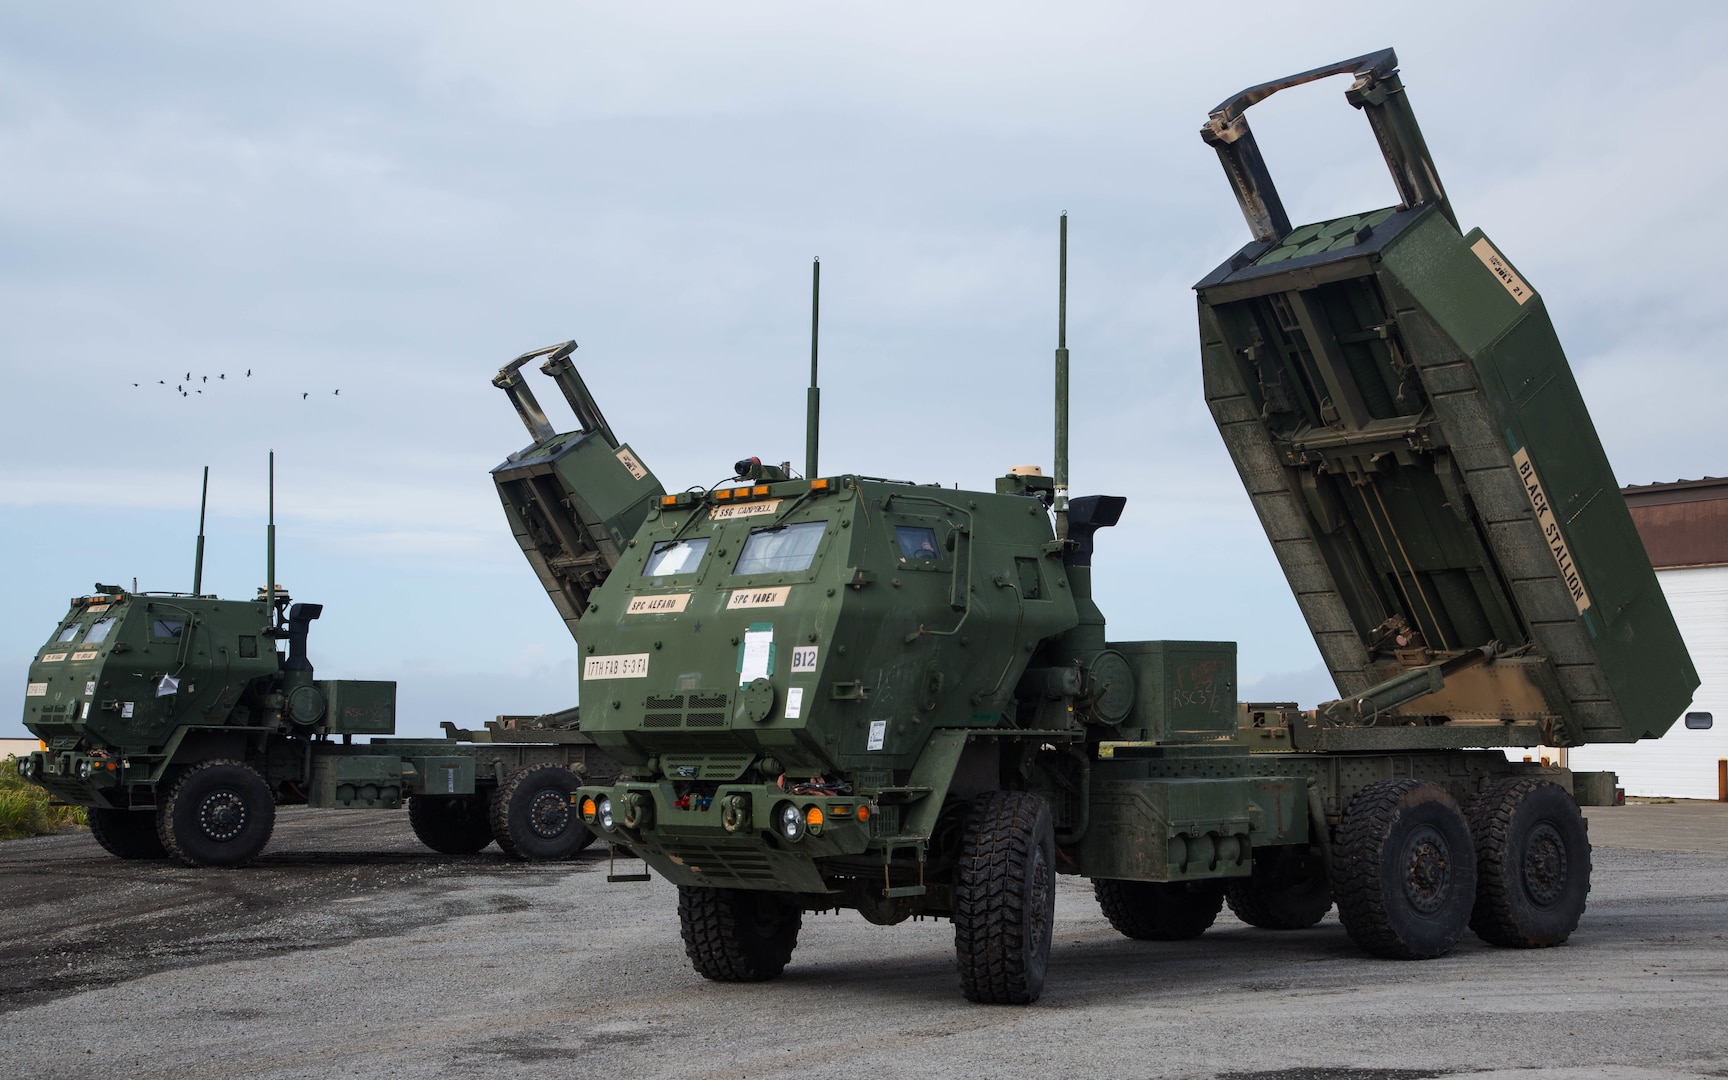 US Military News • U.S. Marines High Mobility Artillery Rocket System (HIMARS) – Northern Edge 2021